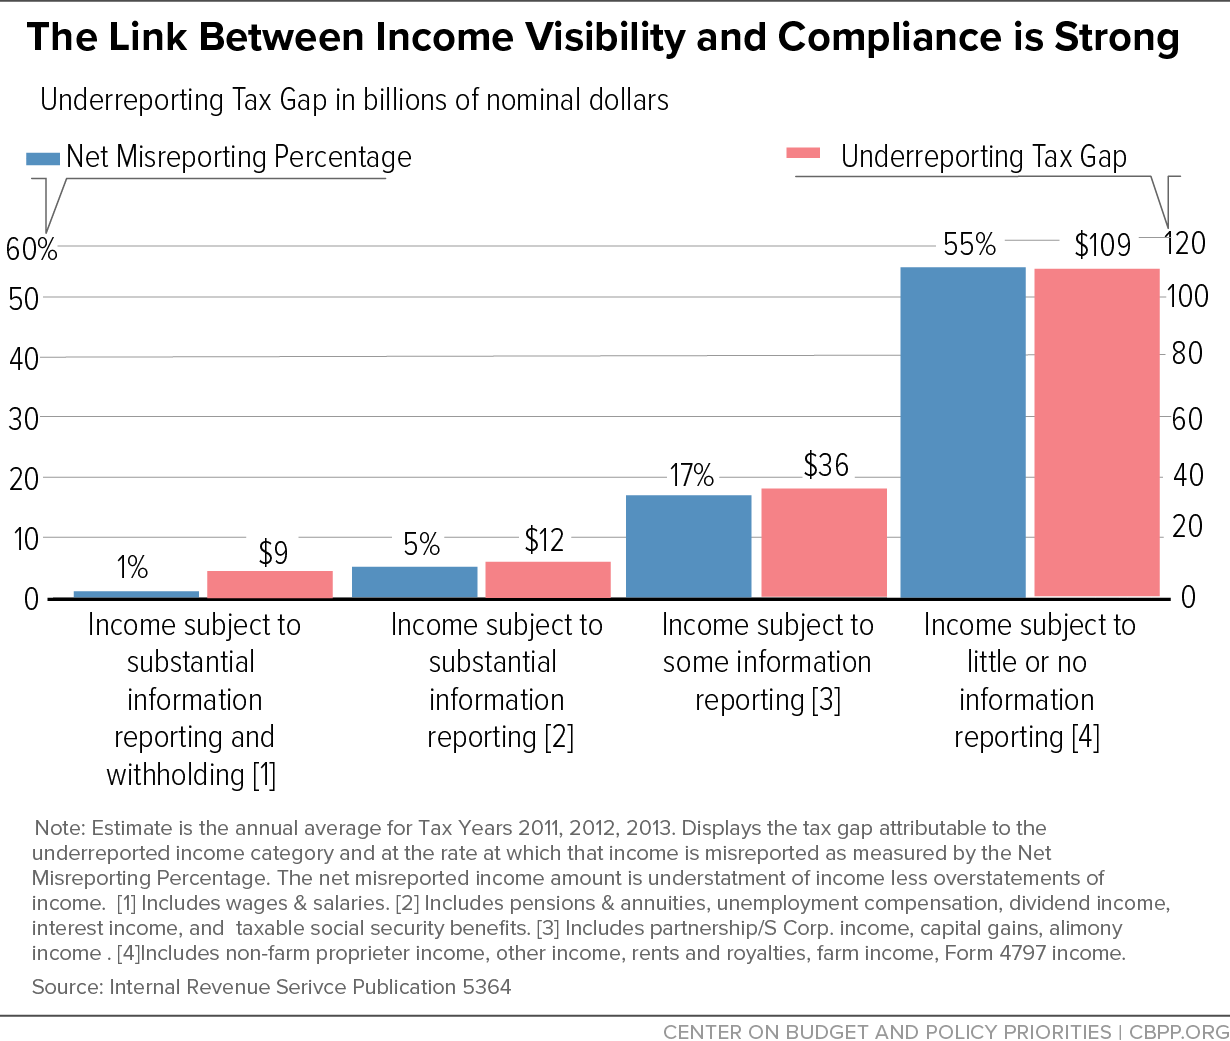 The Link Between Income Visibility and Compliance is Strong